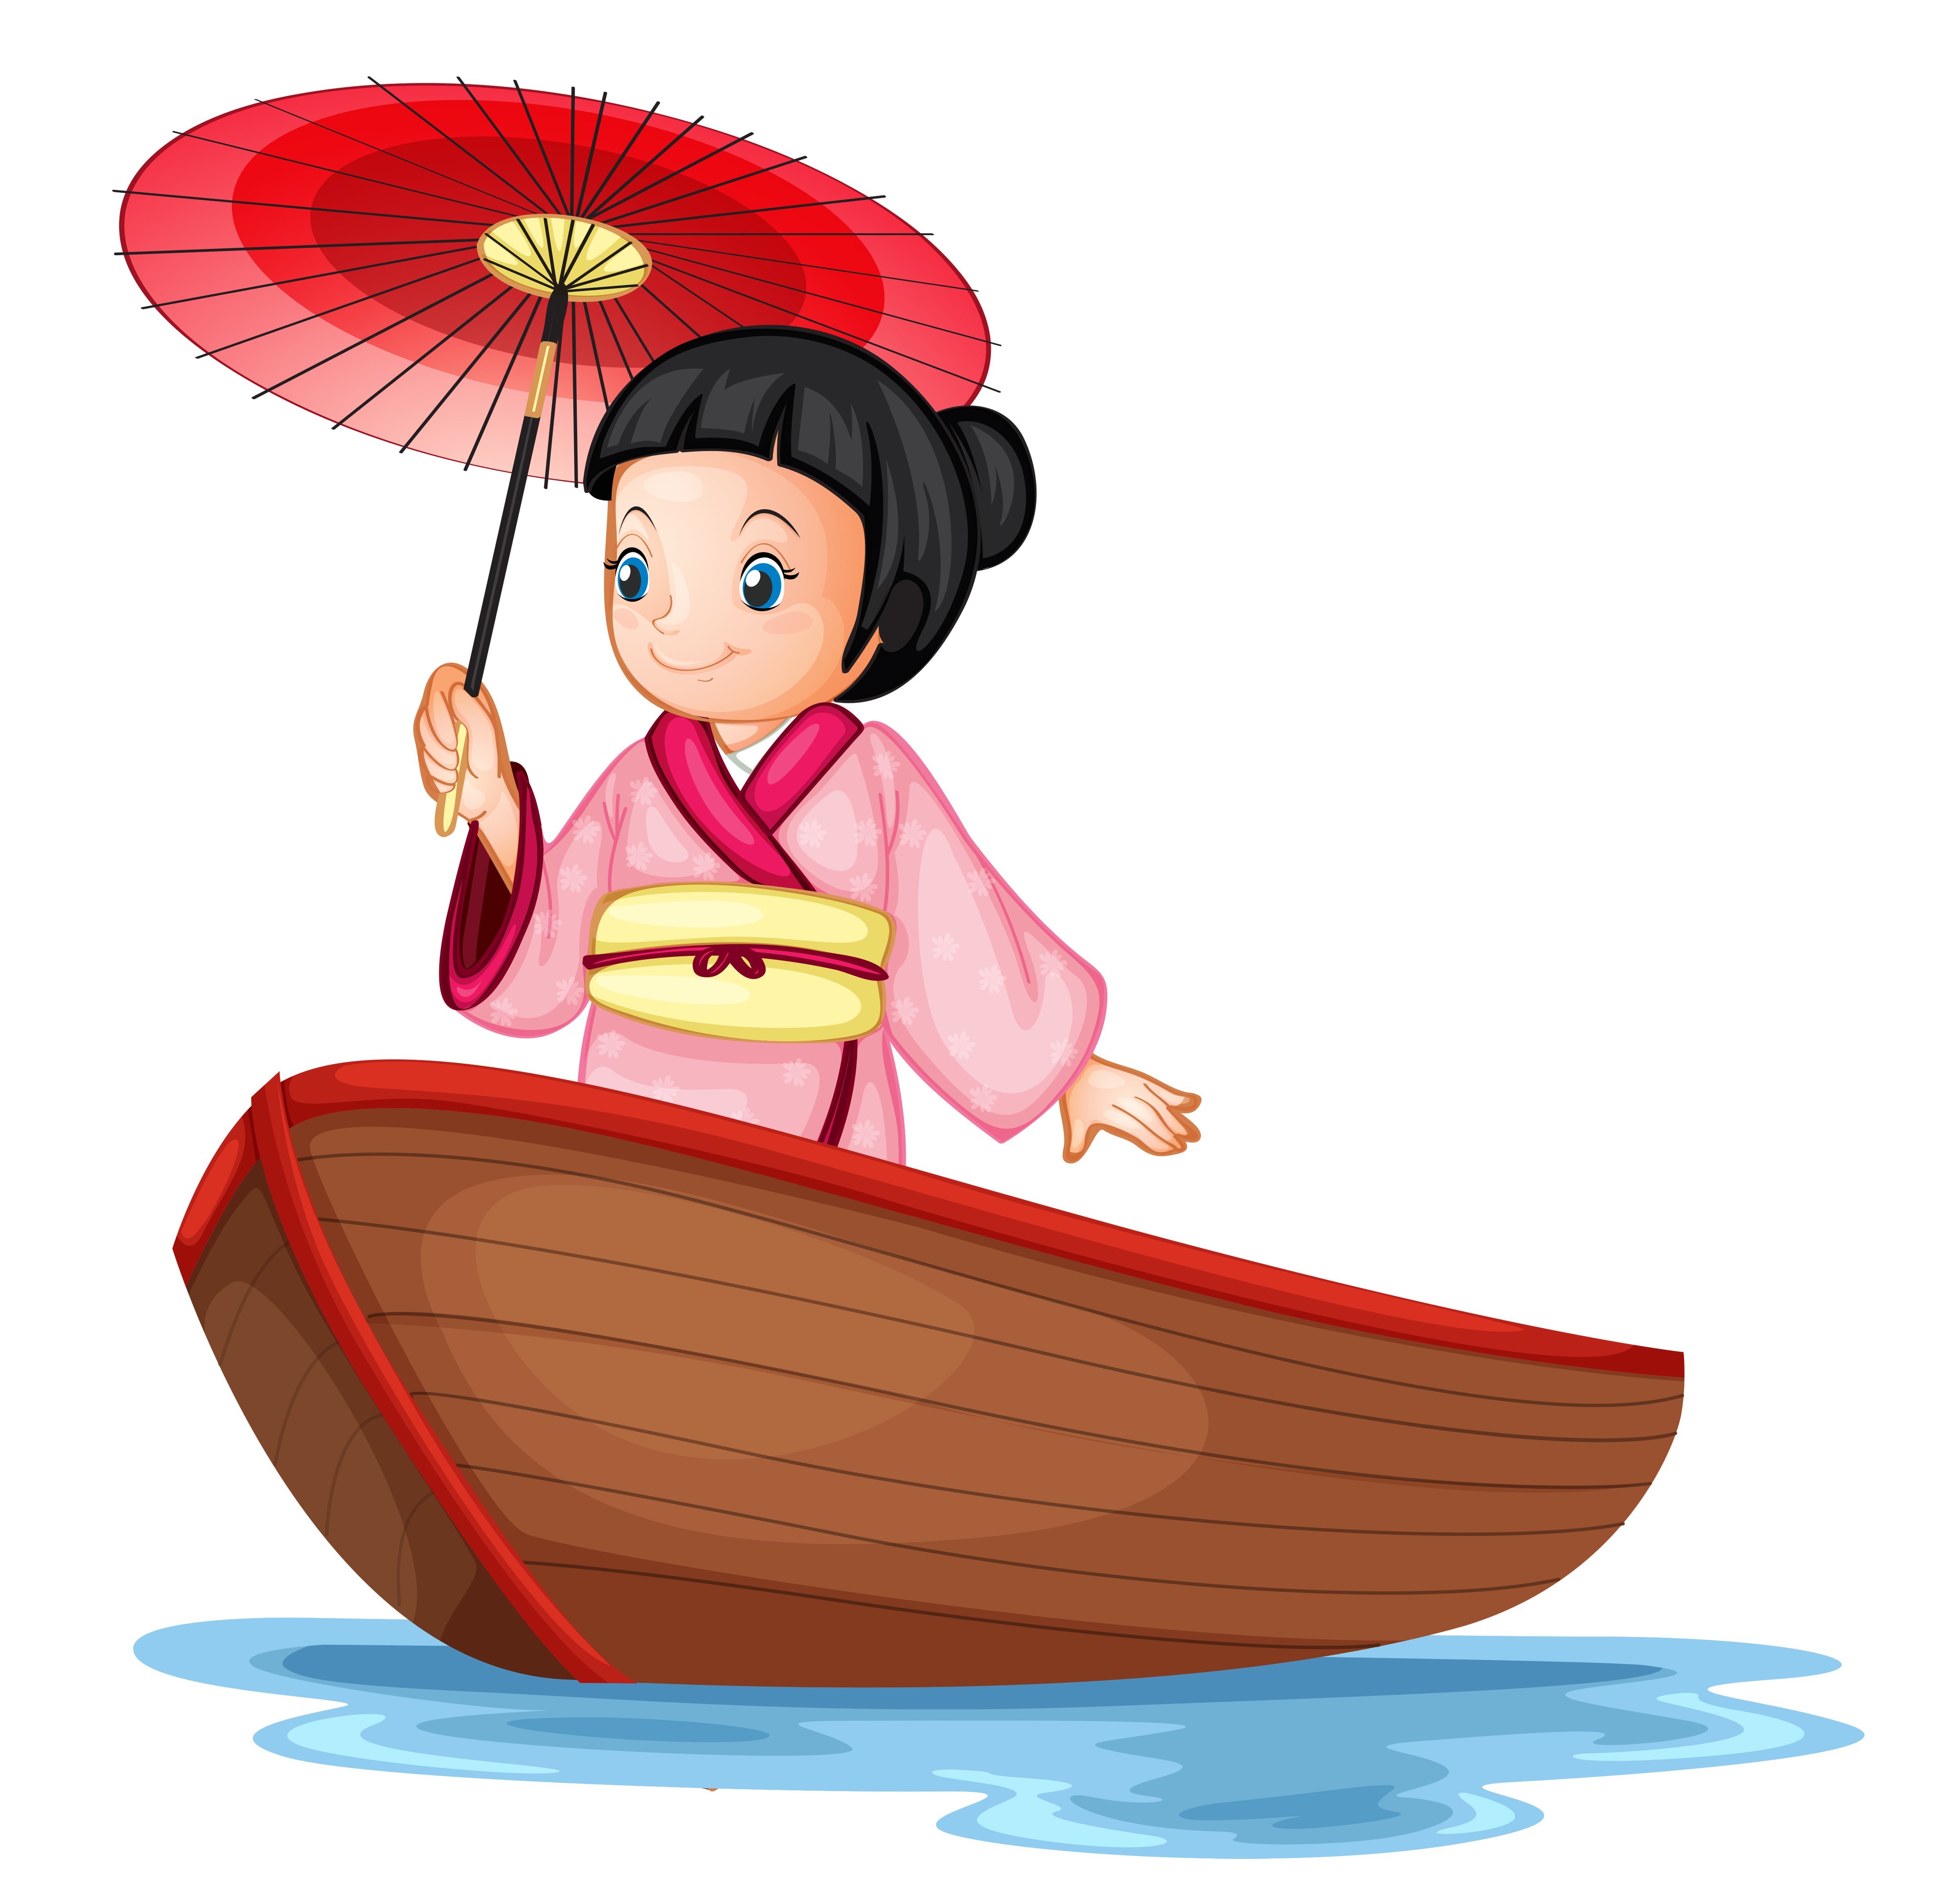 A japanese girl on wooden boat - Download Free Vectors ...